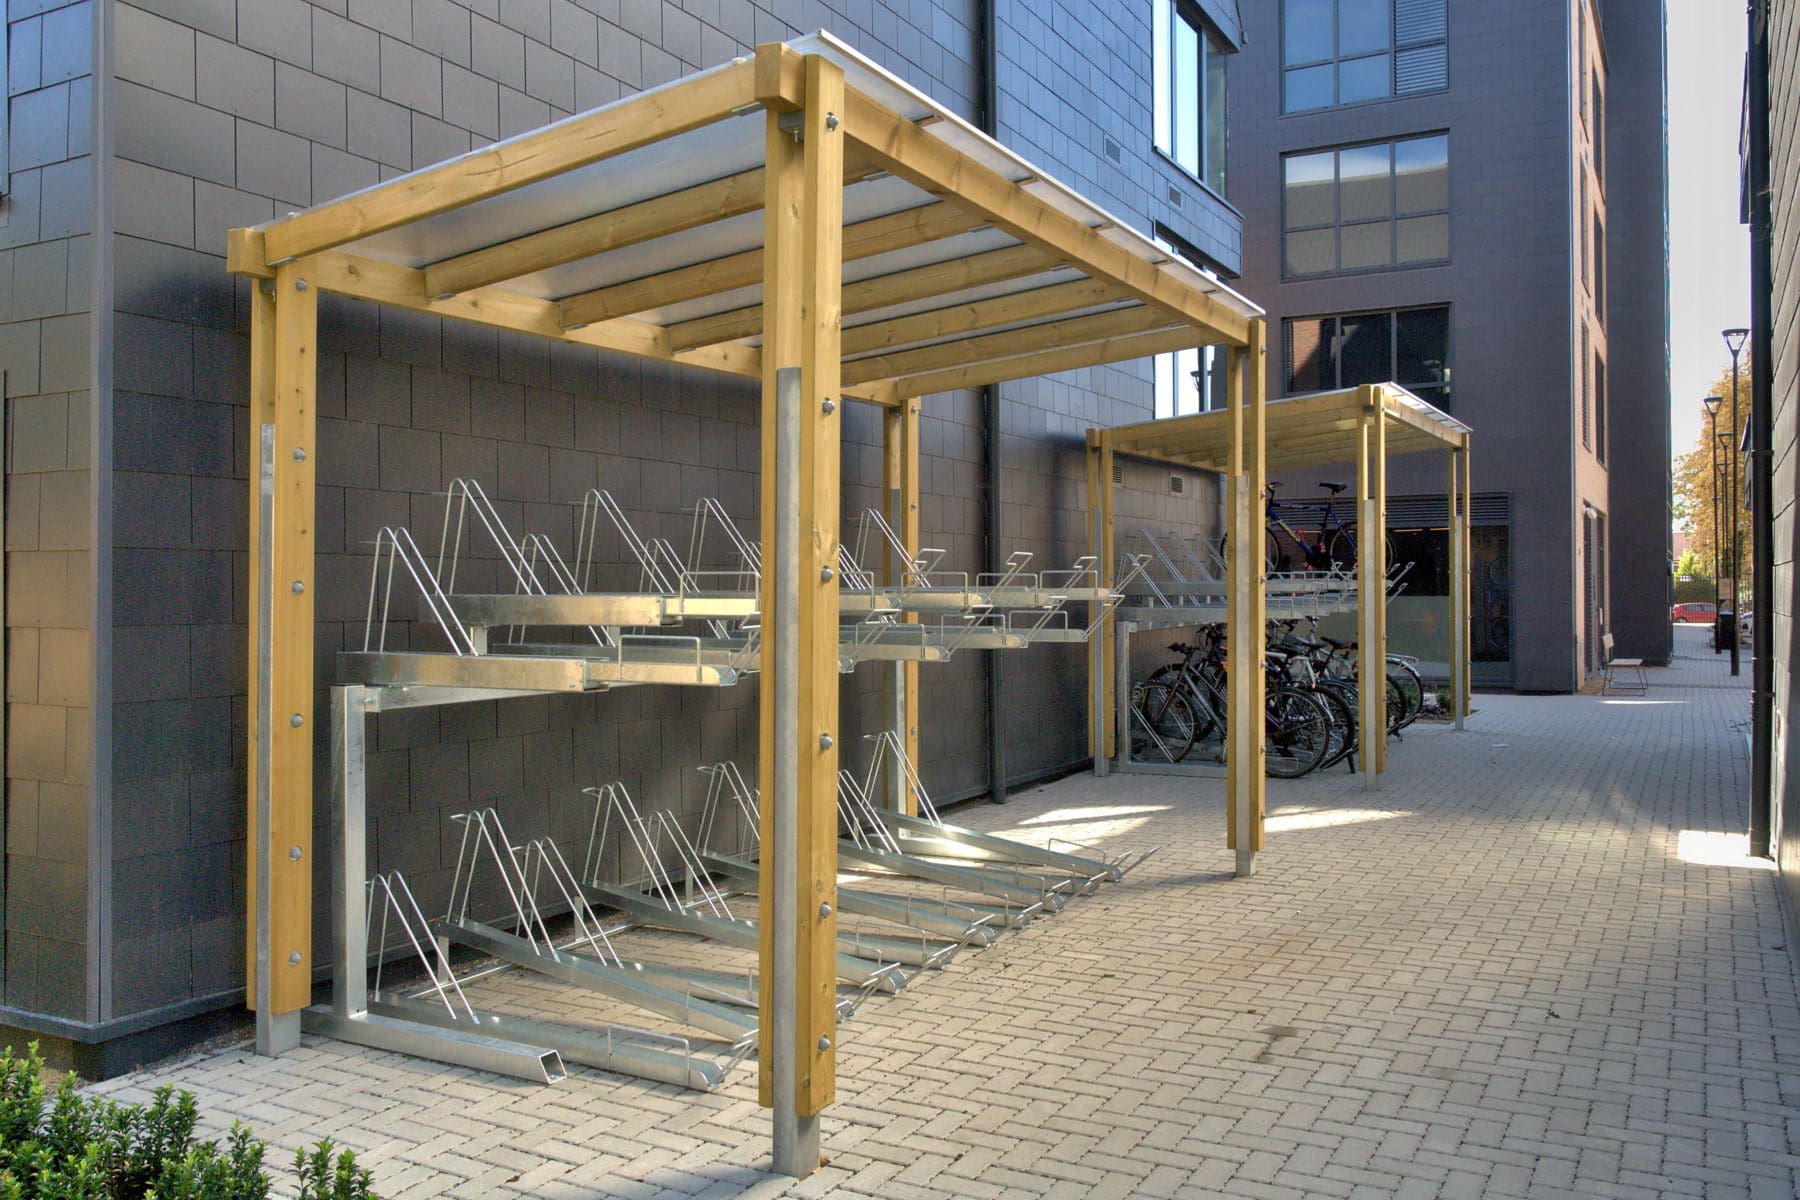 Outdoor canopies with wooden sides and see through plastic top covering metal two tiered bicycle stores